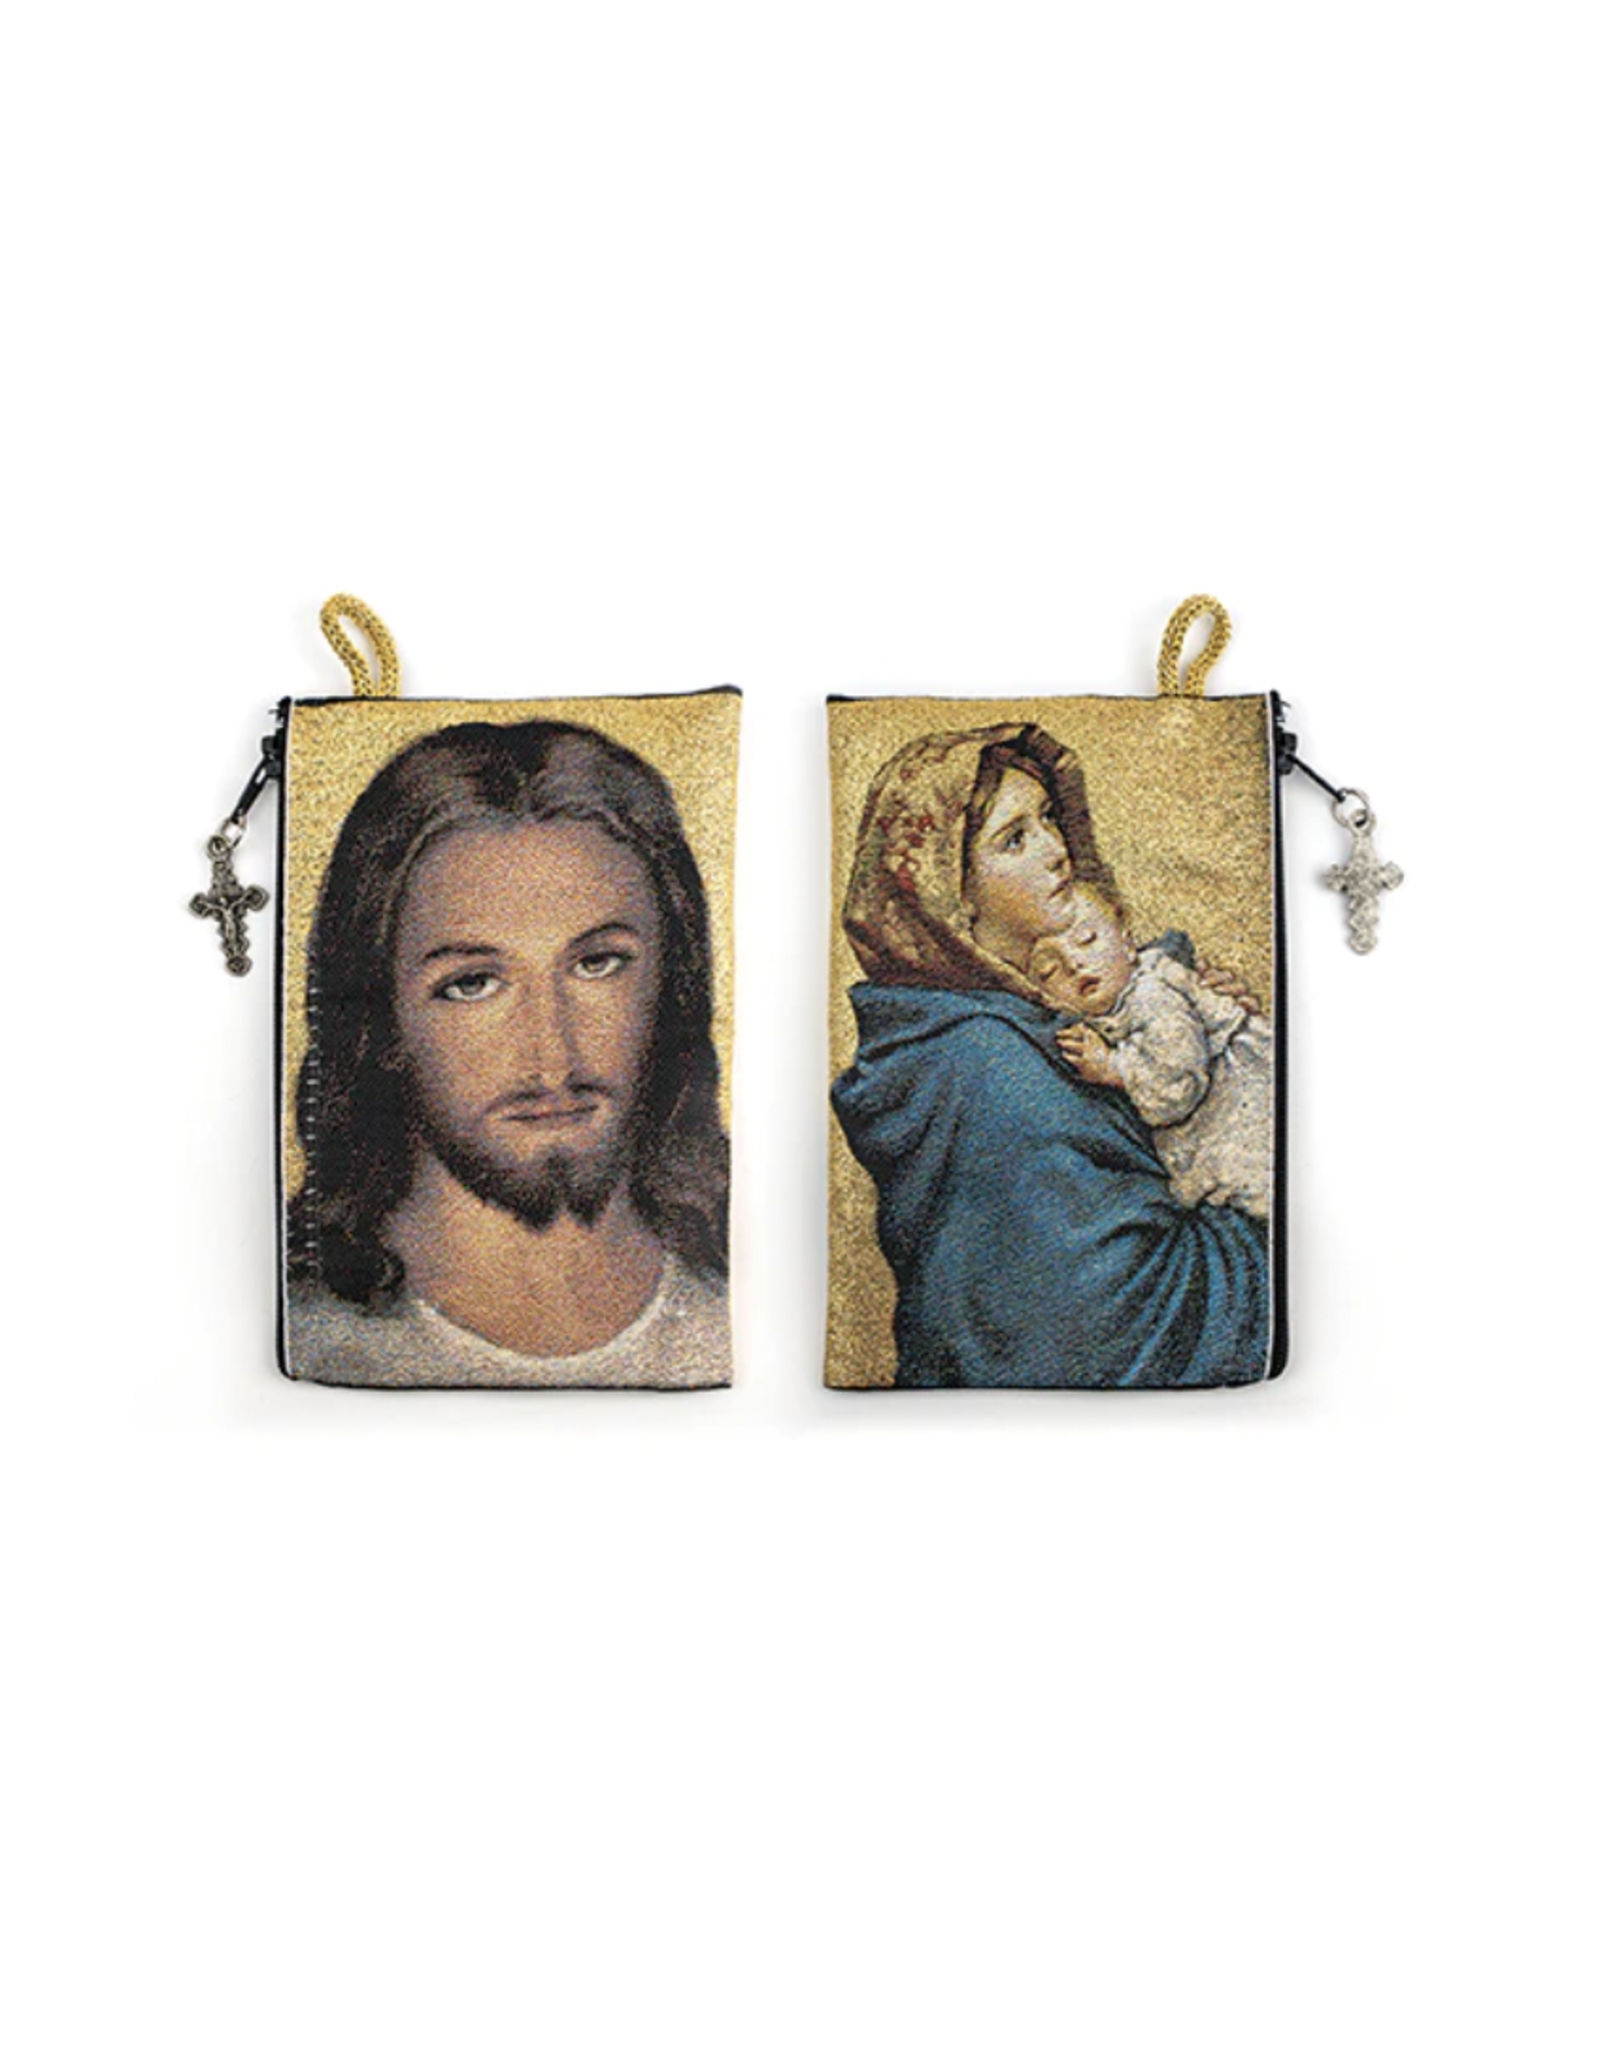 Logos Tapestry Rosary Pouch -